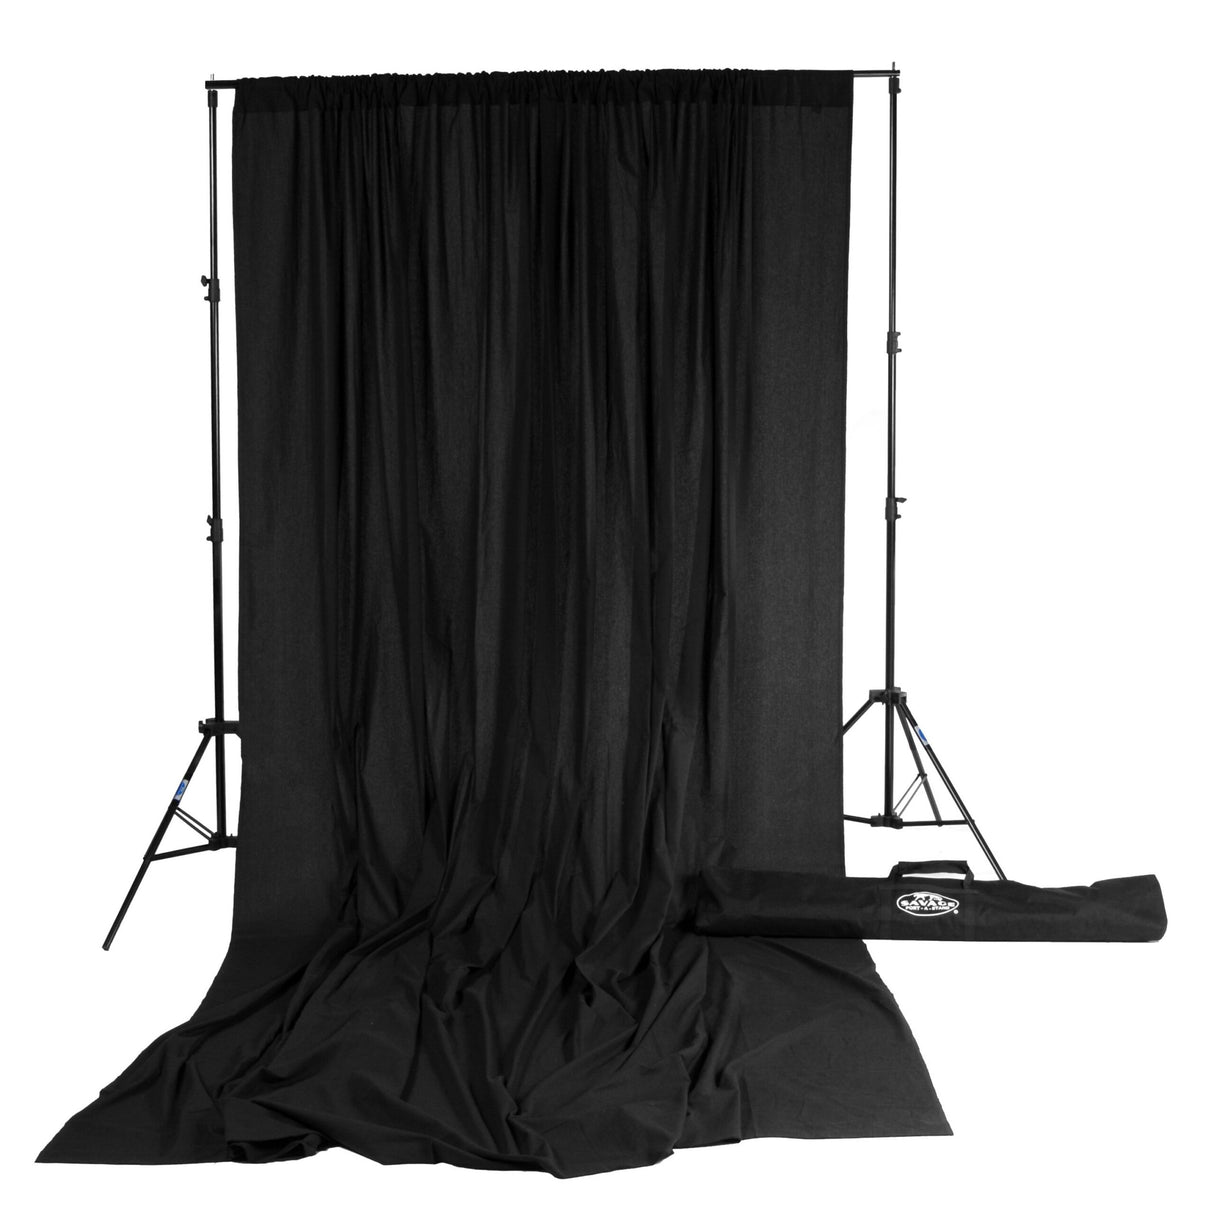 Savage 20PAS-12 10 x 12-Feet Solid Muslin Background Kit with Port-A-Stand, Black